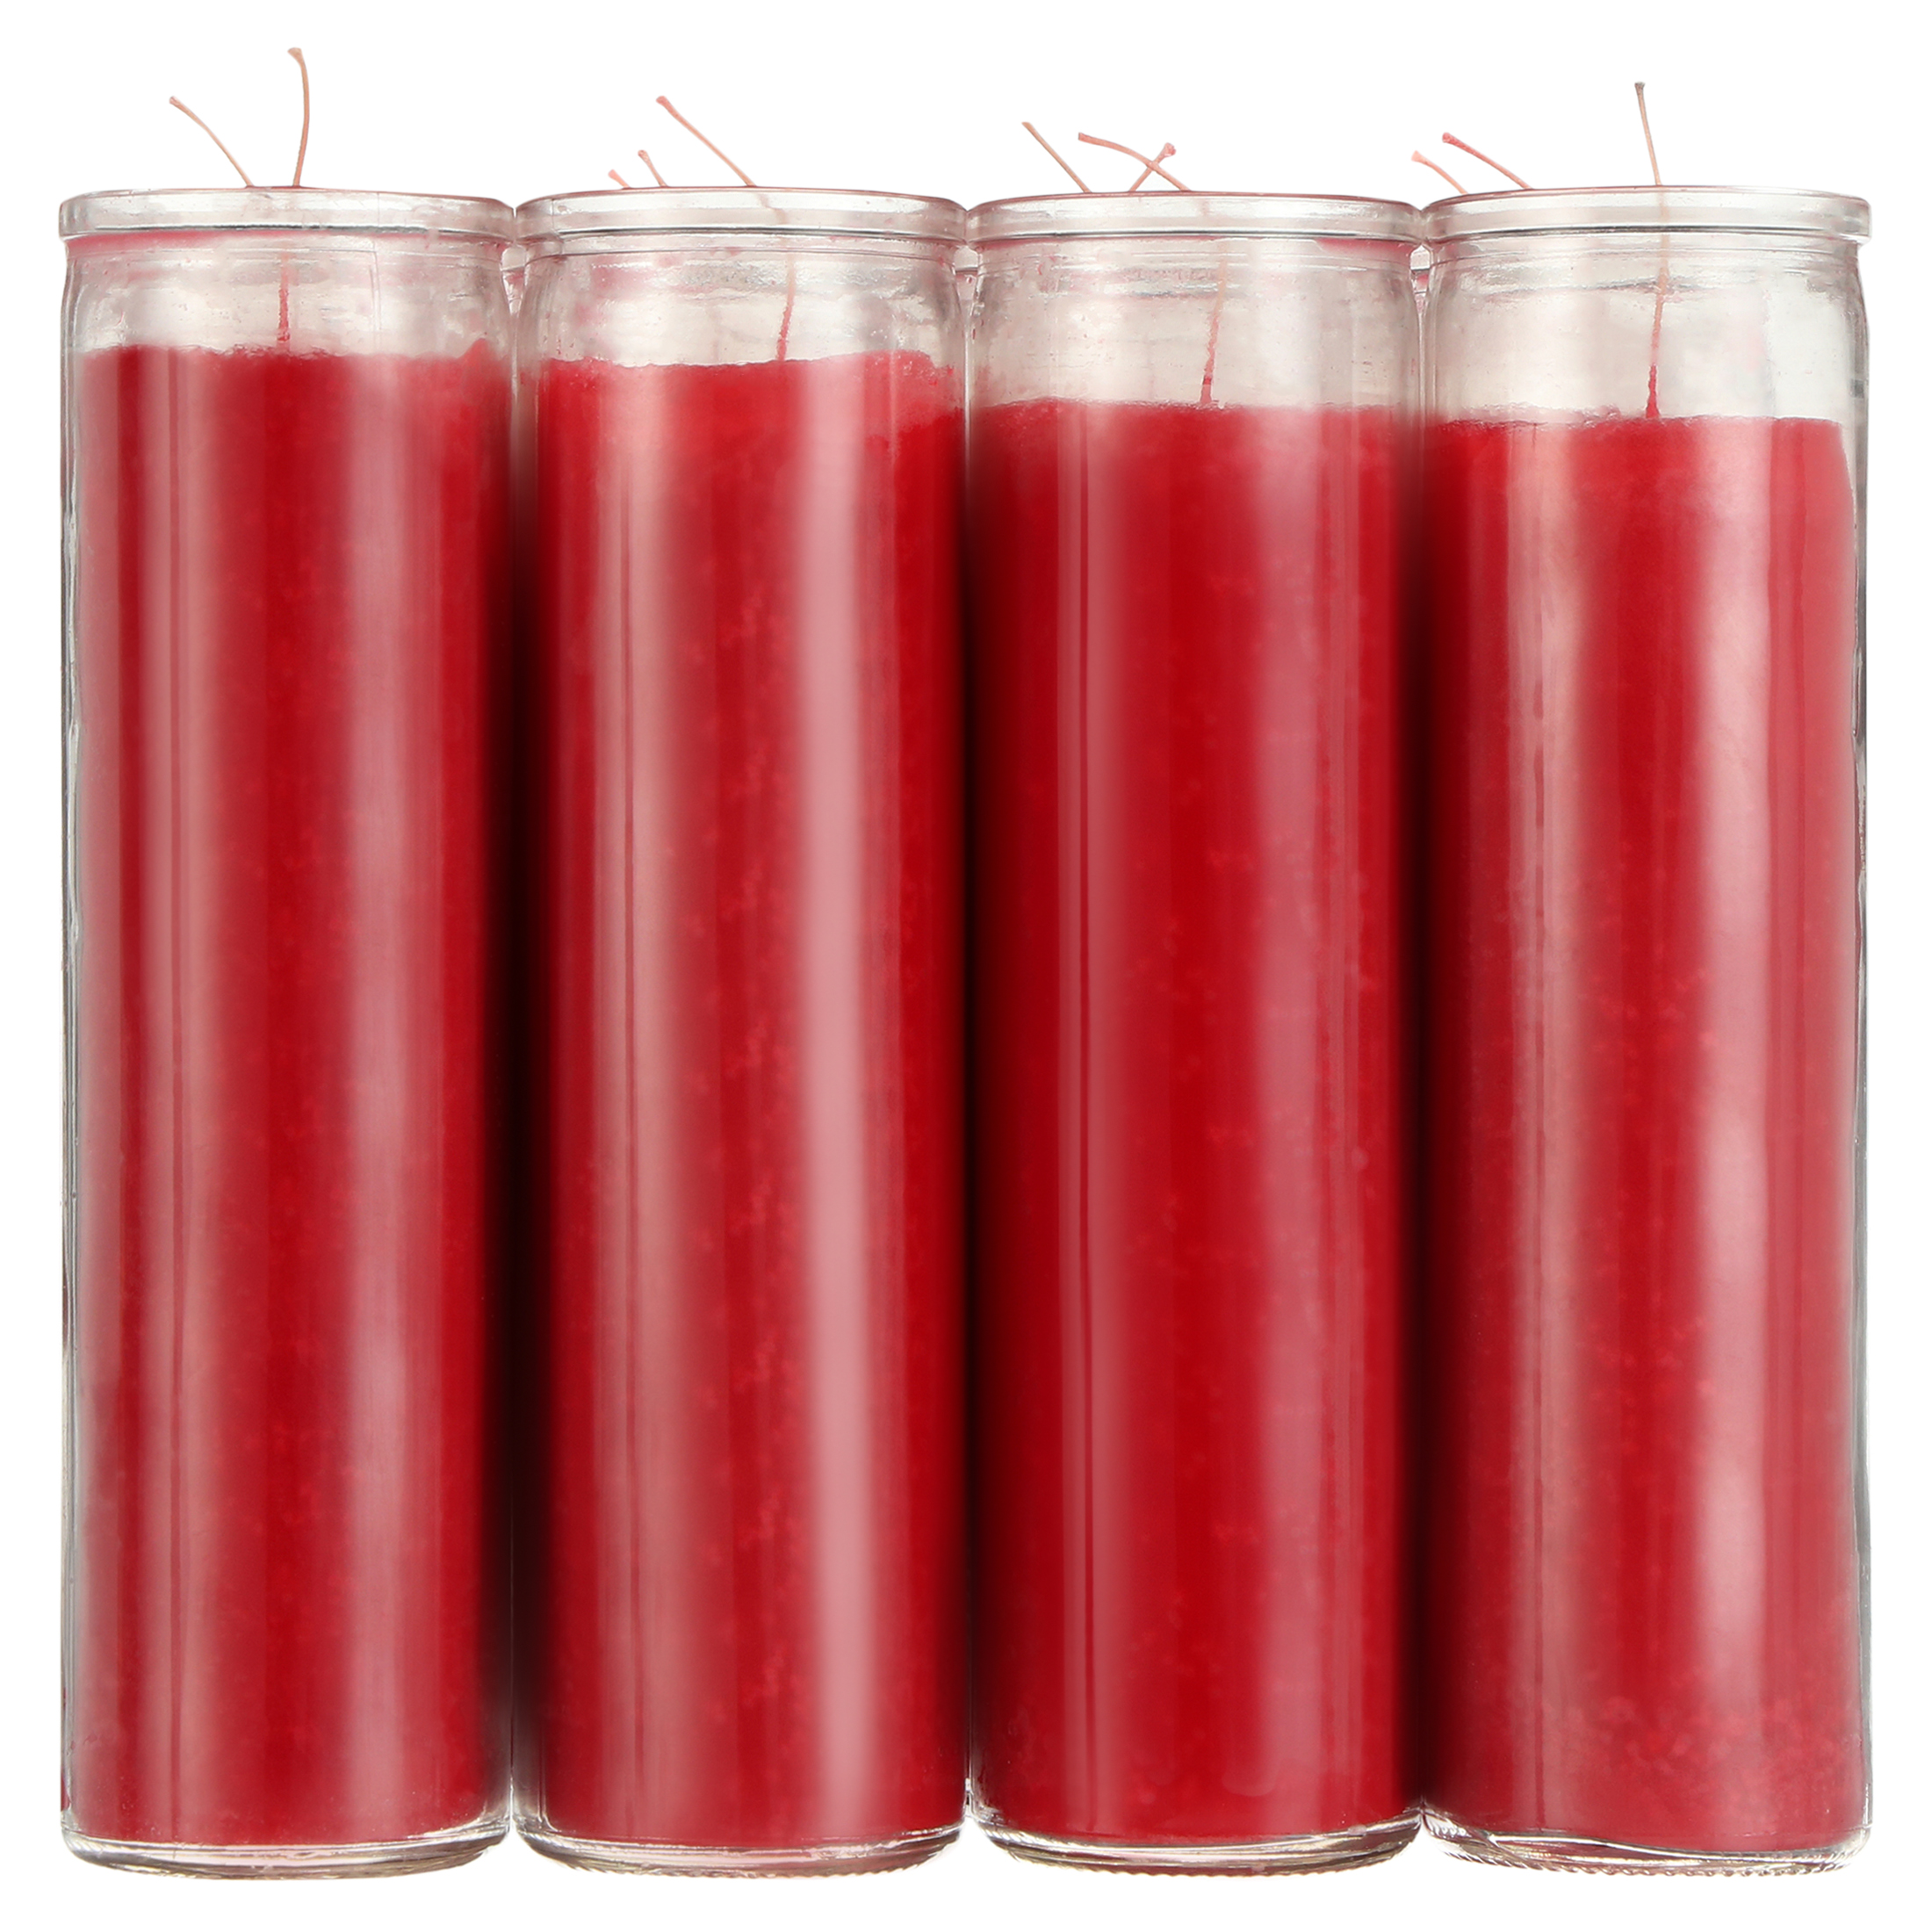 Sanctuary Solid Color Church Candles, 12 pack - image 5 of 9